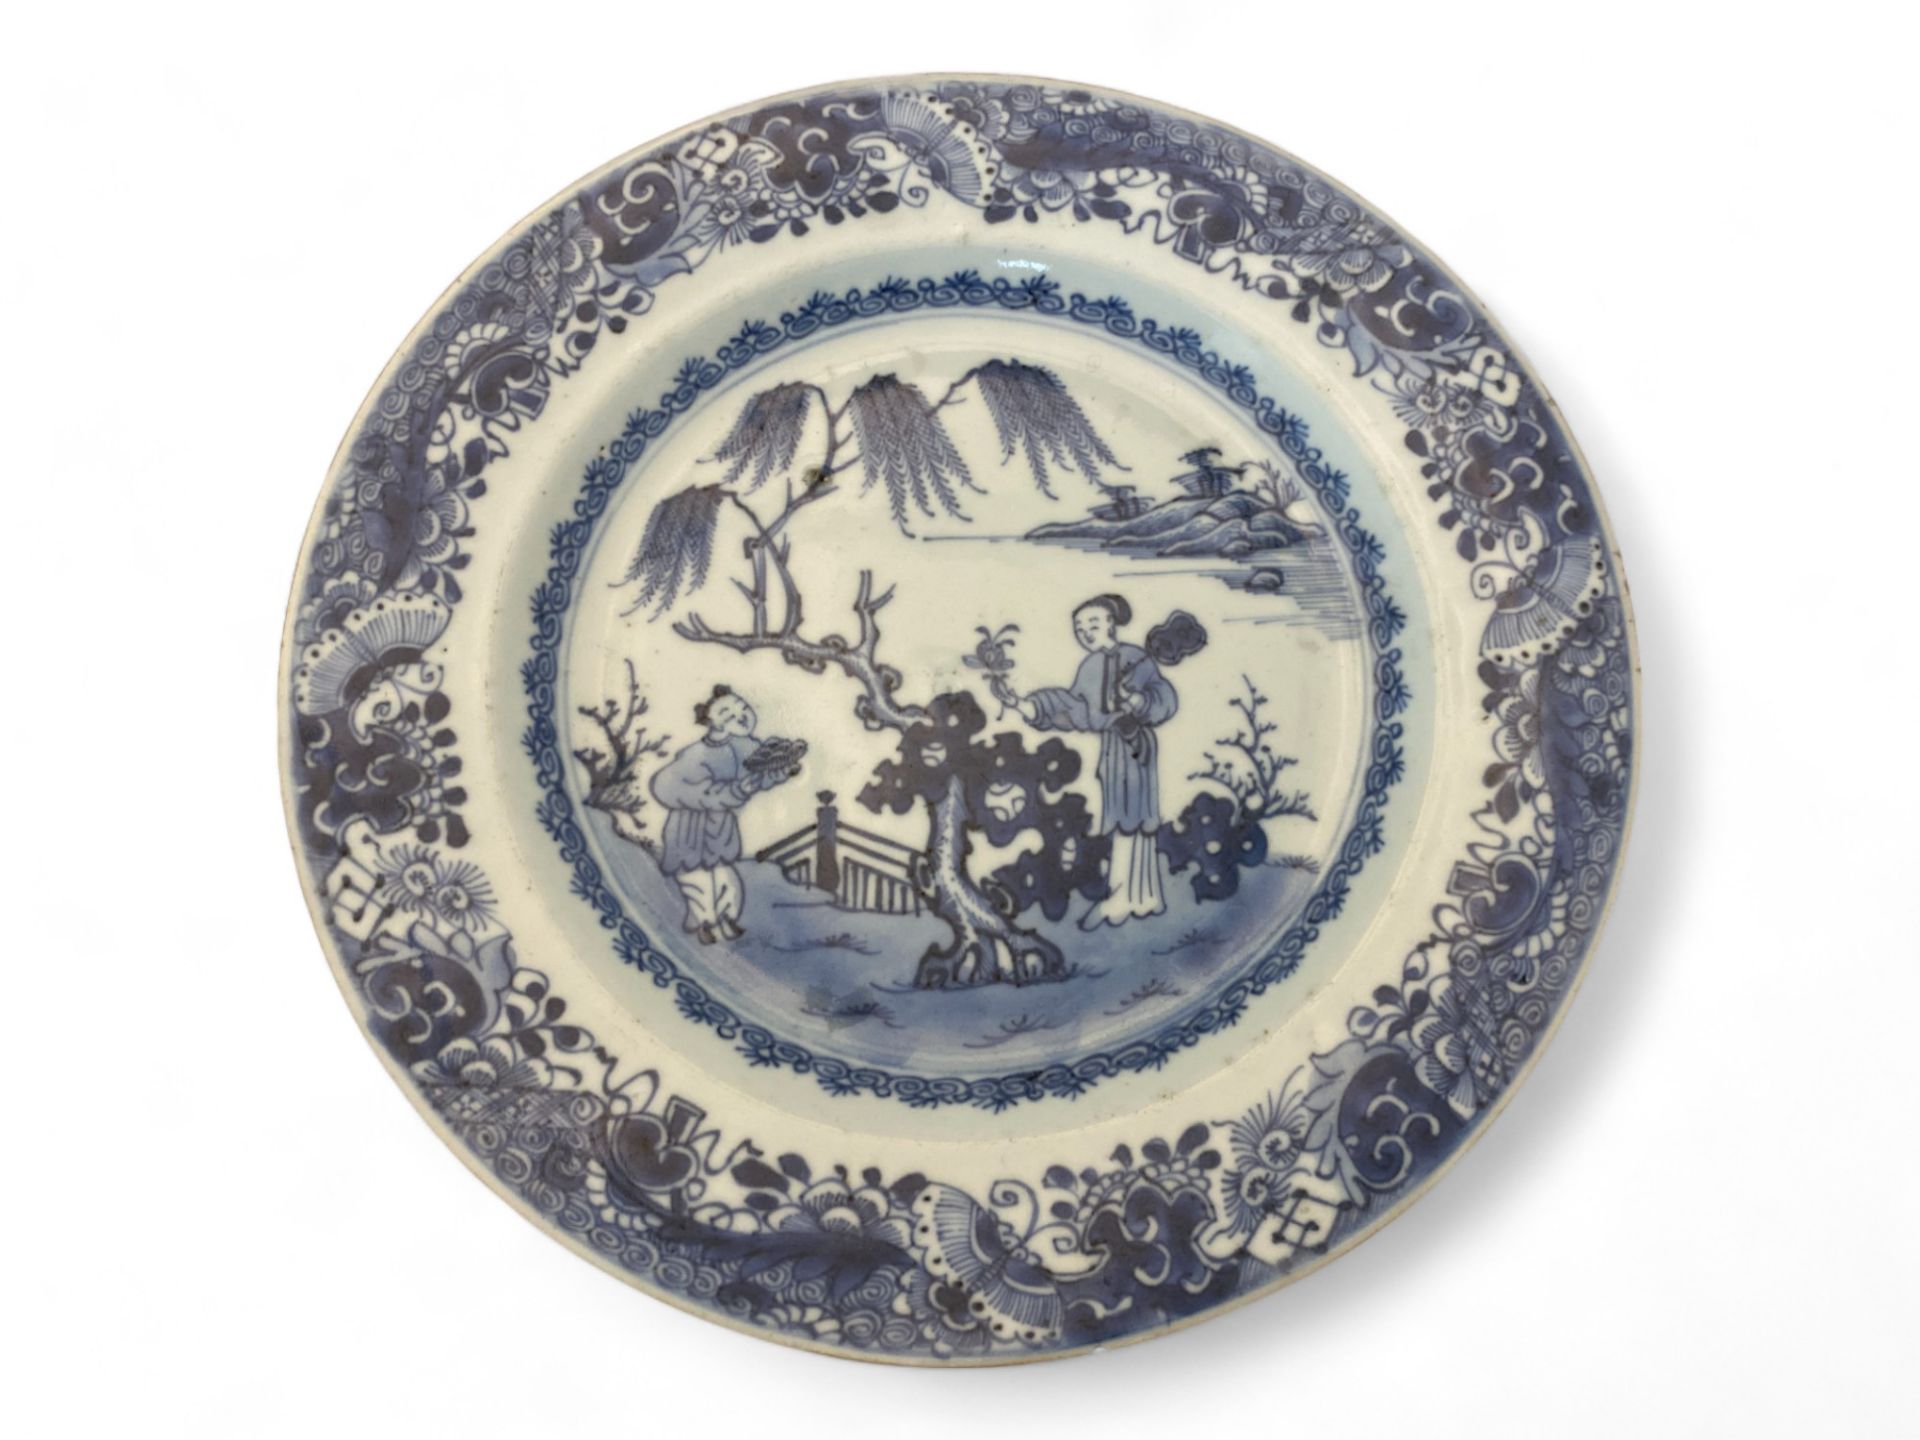 A 19th century Chinese blue and white peony pattern plate and a 19th century Chinese willow pattern - Image 5 of 6